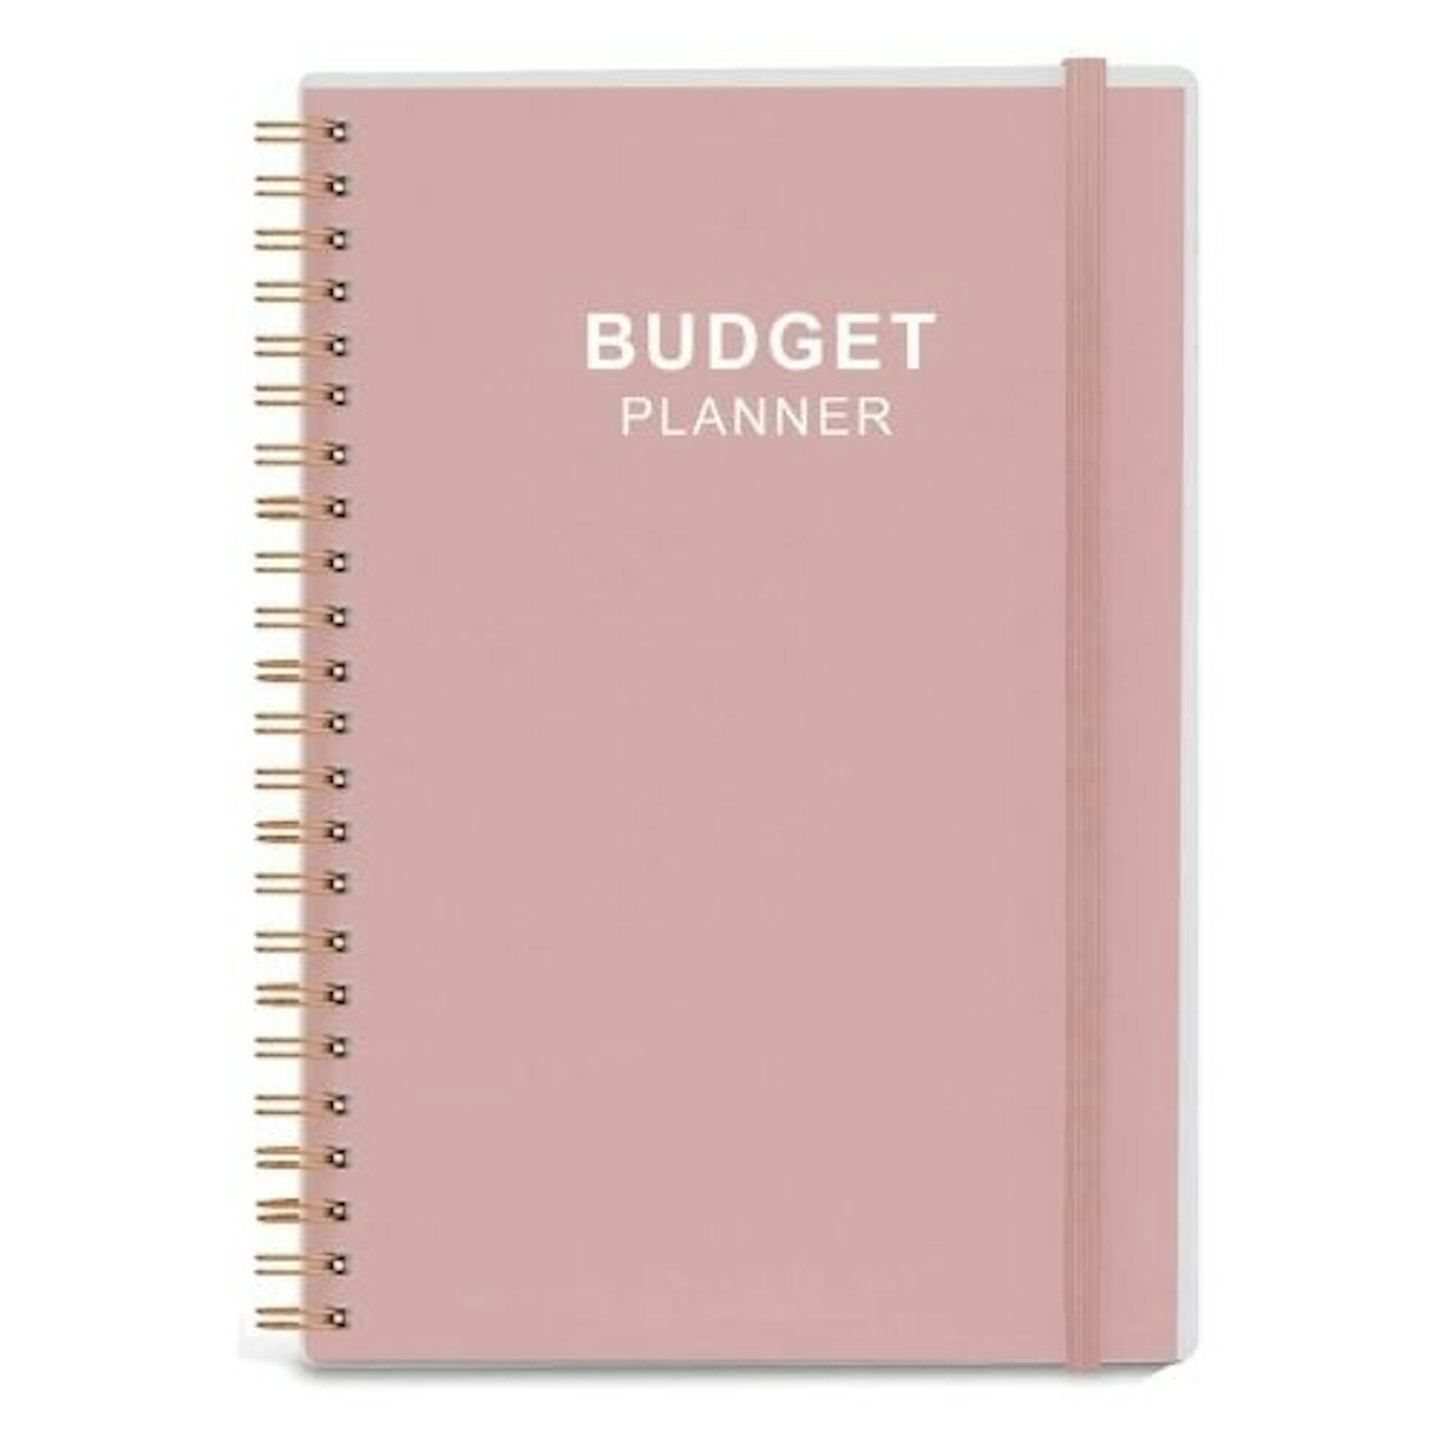 Budget Planner - Monthly Finance Organizer with Expense Tracker Notebook